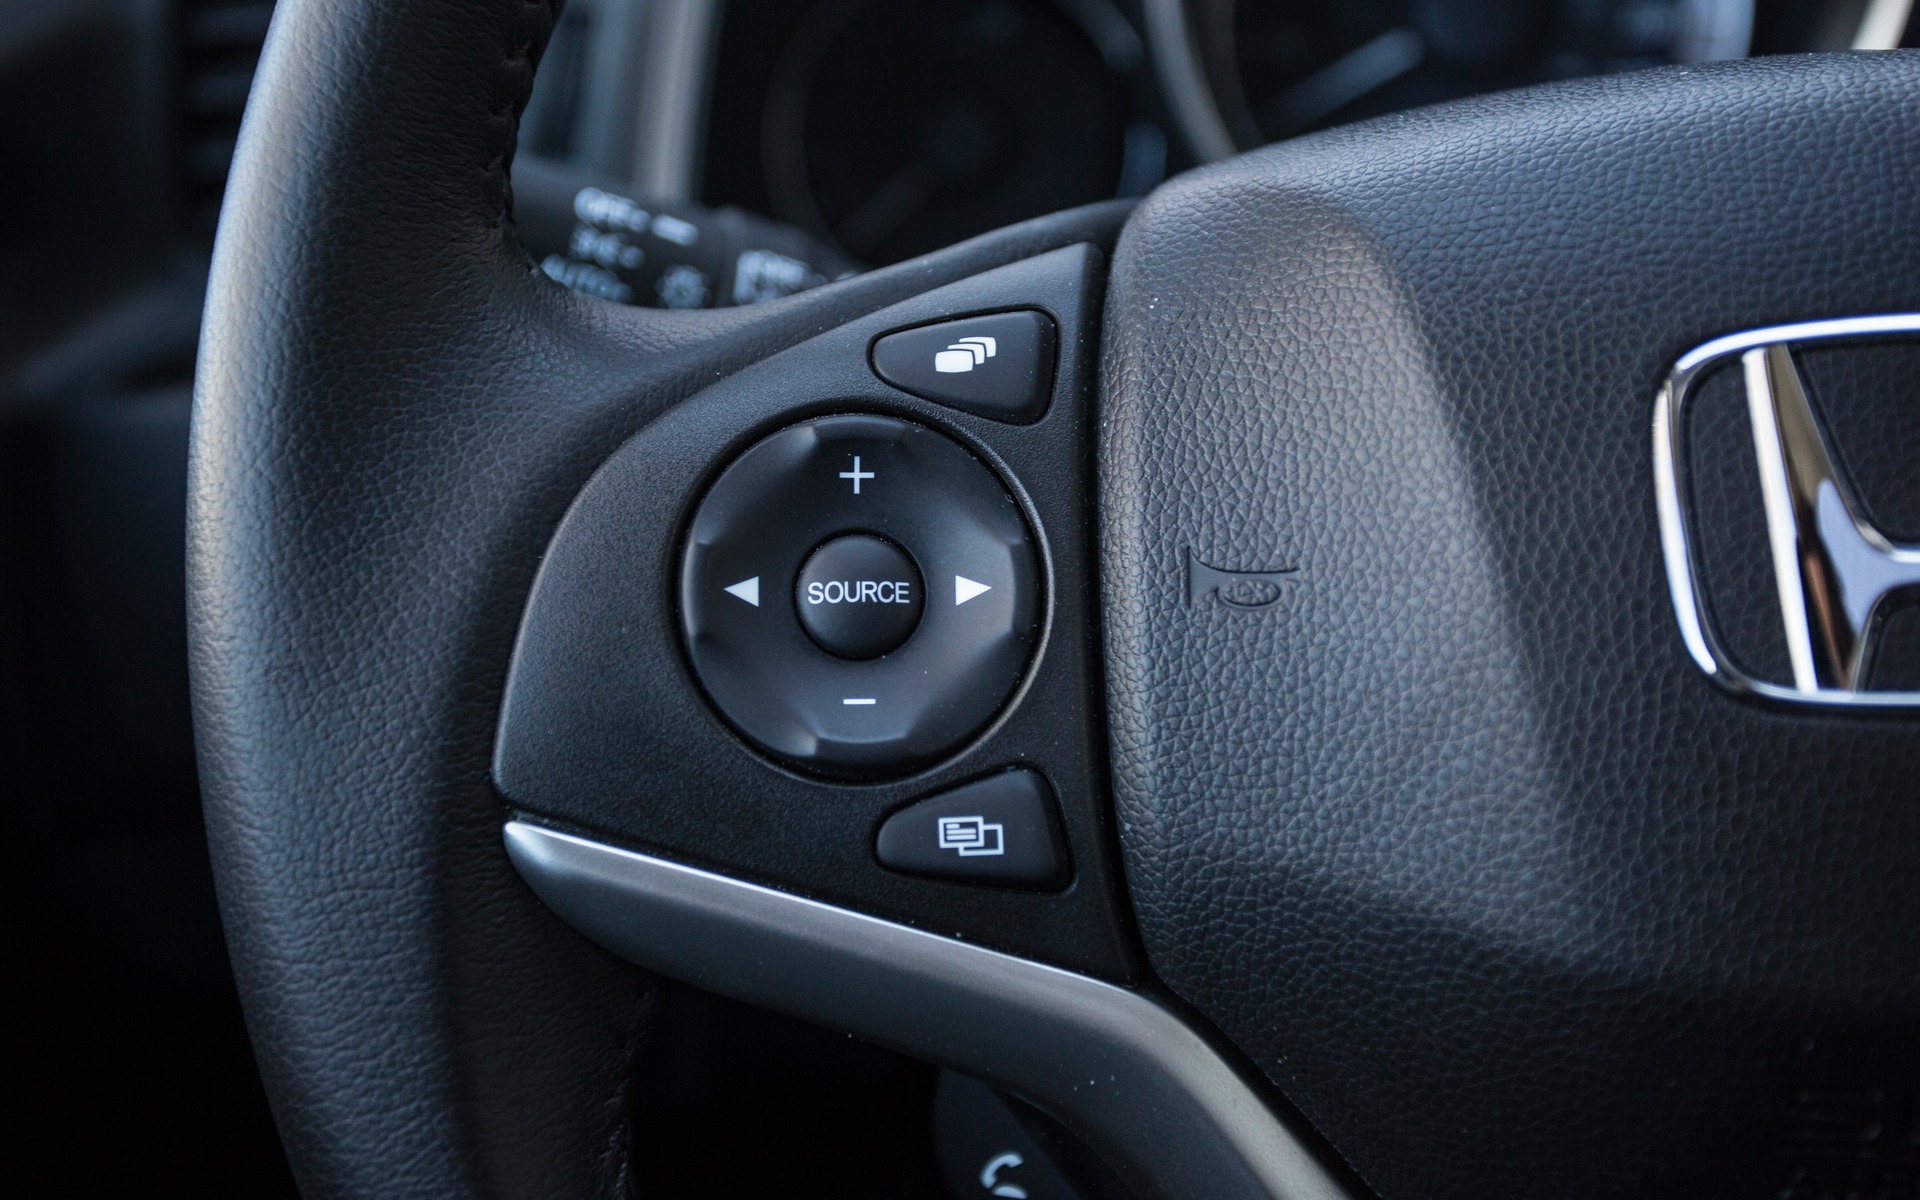 The steering wheel mounted buttons on the Fit are really useful.